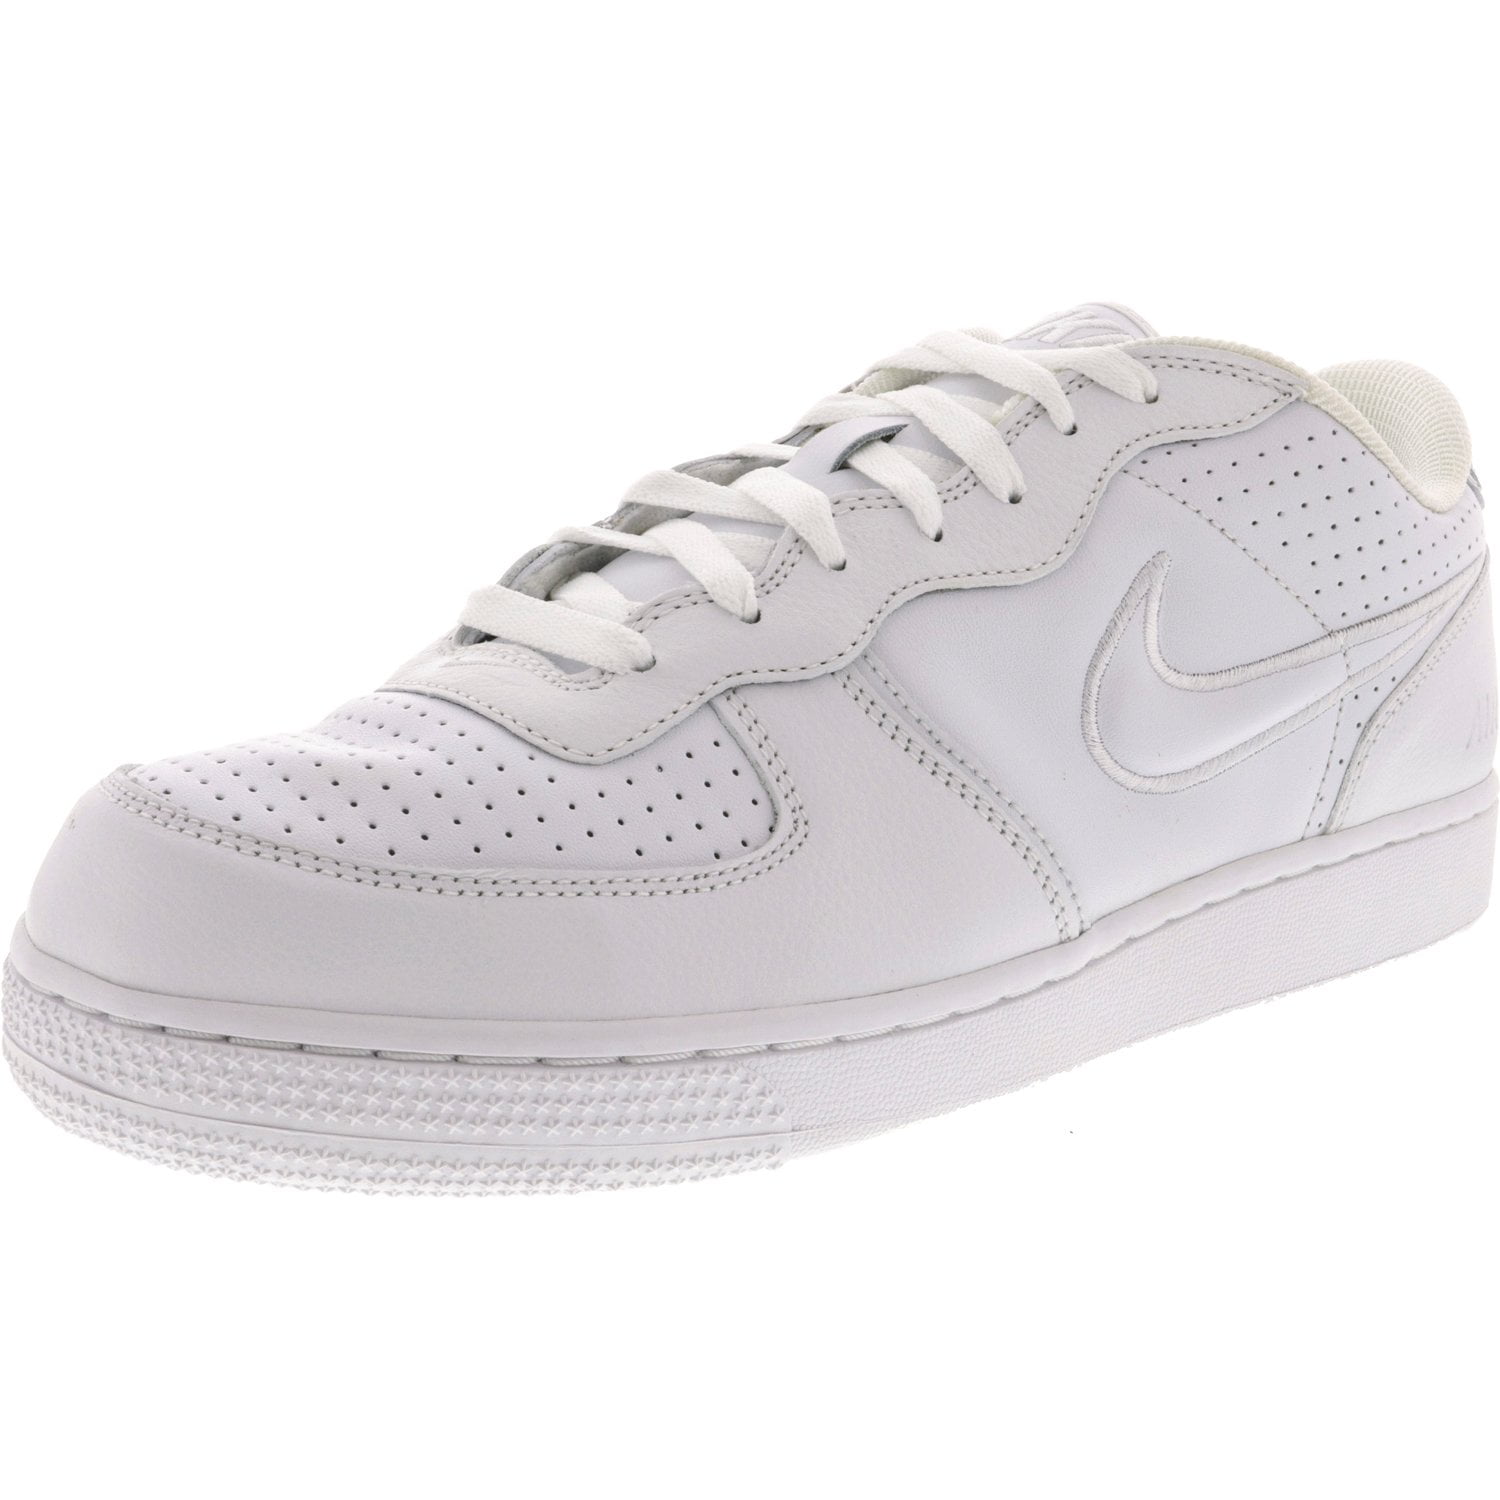 Nike Men's Air Zoom Infiltrator White / Ankle-High Running Shoe - 11.5M ...